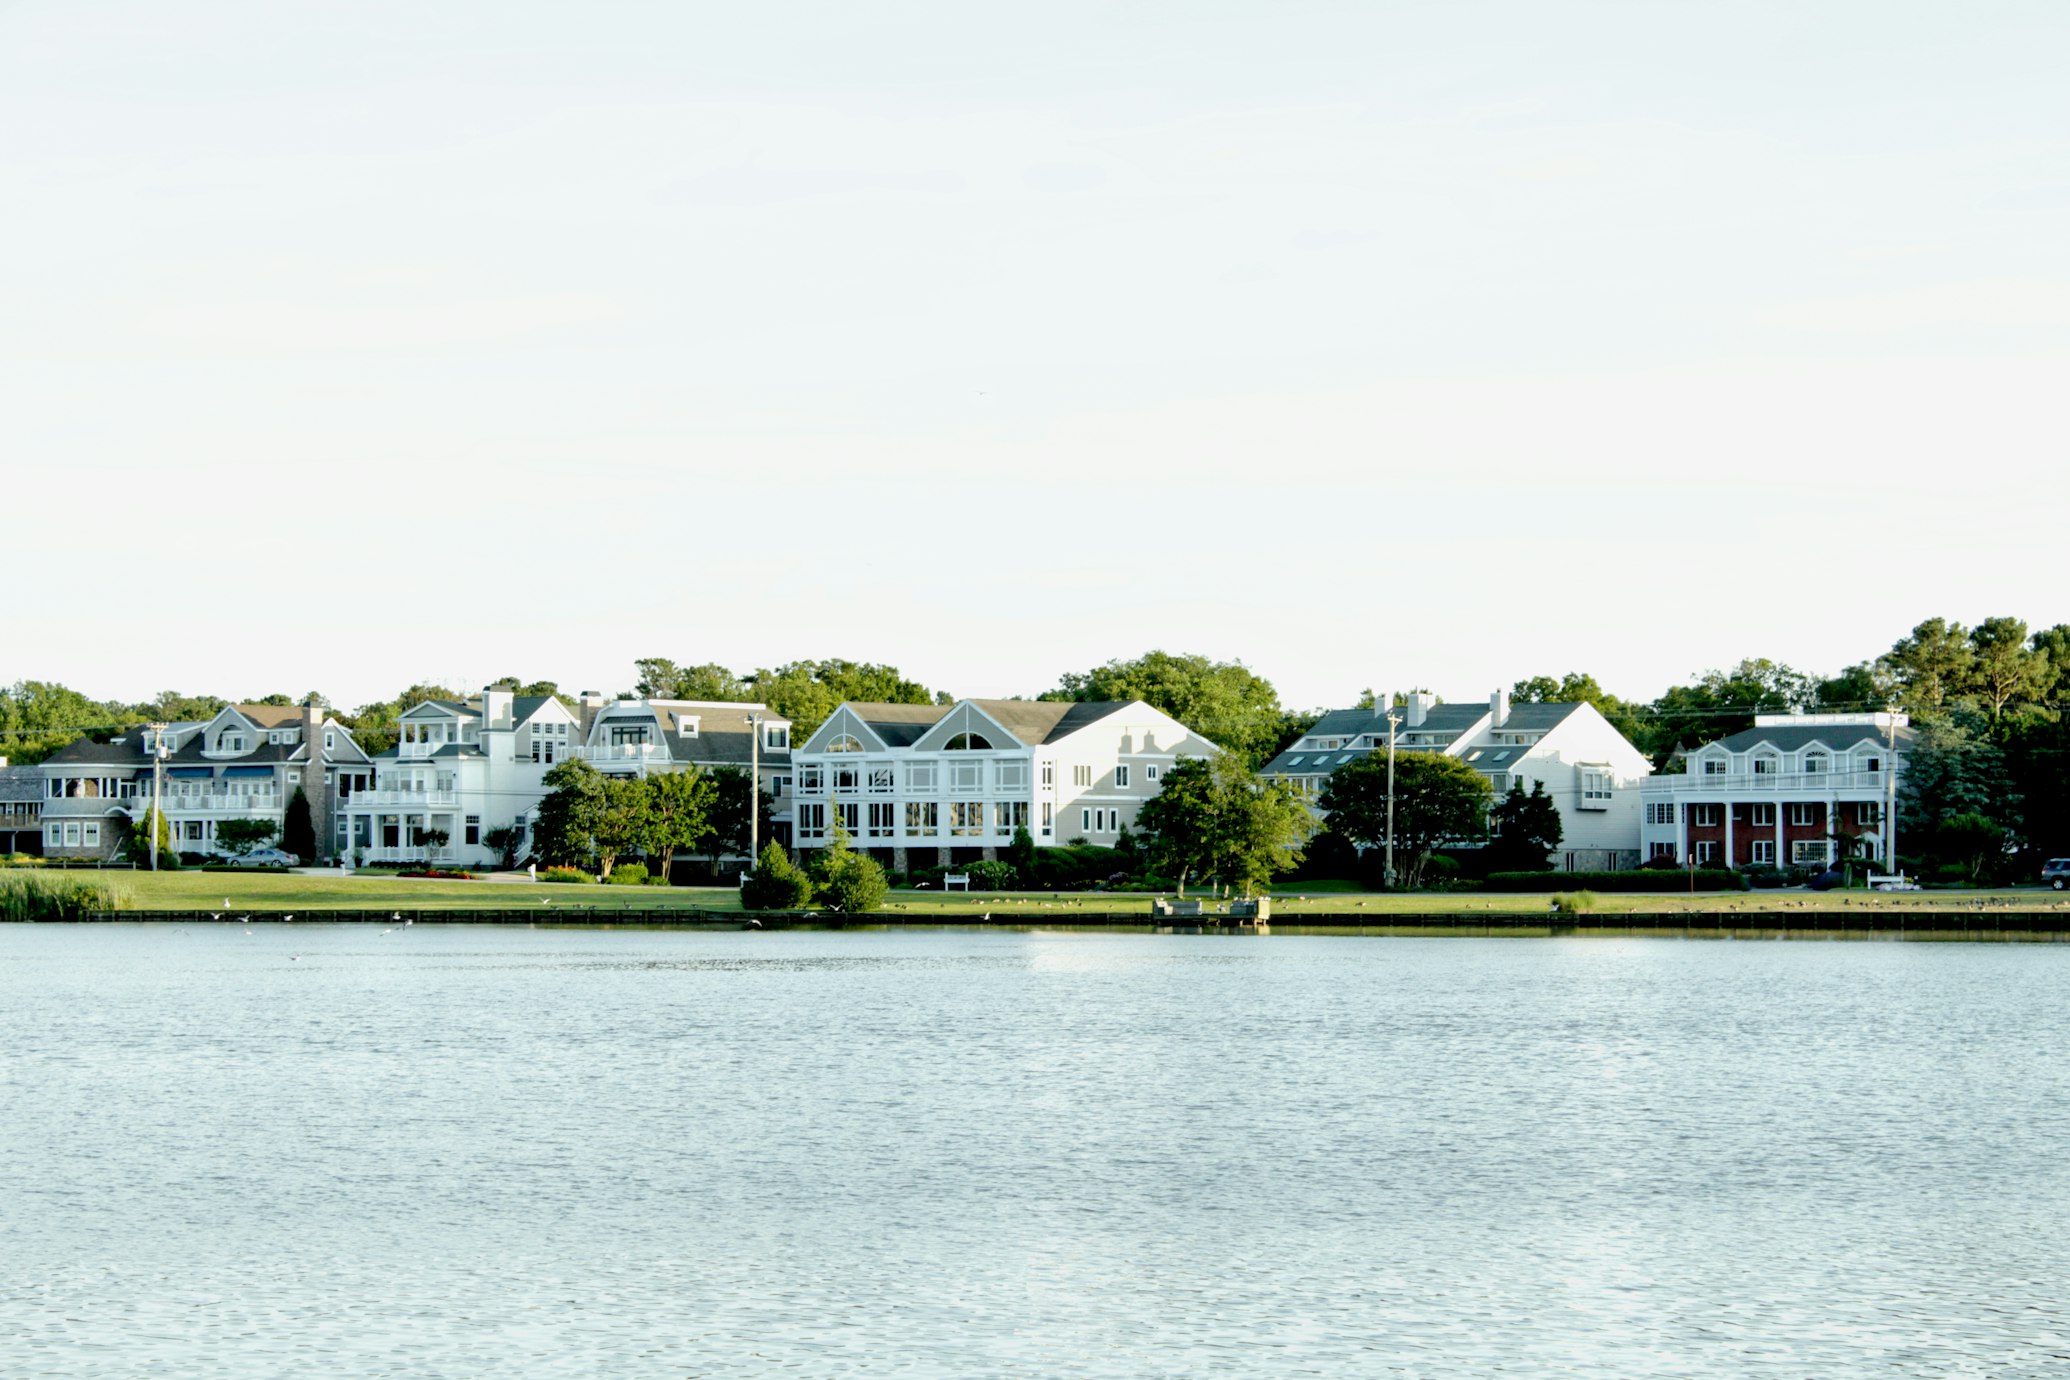 Beautiful houses lined up, depicting residential real estate in Delaware.